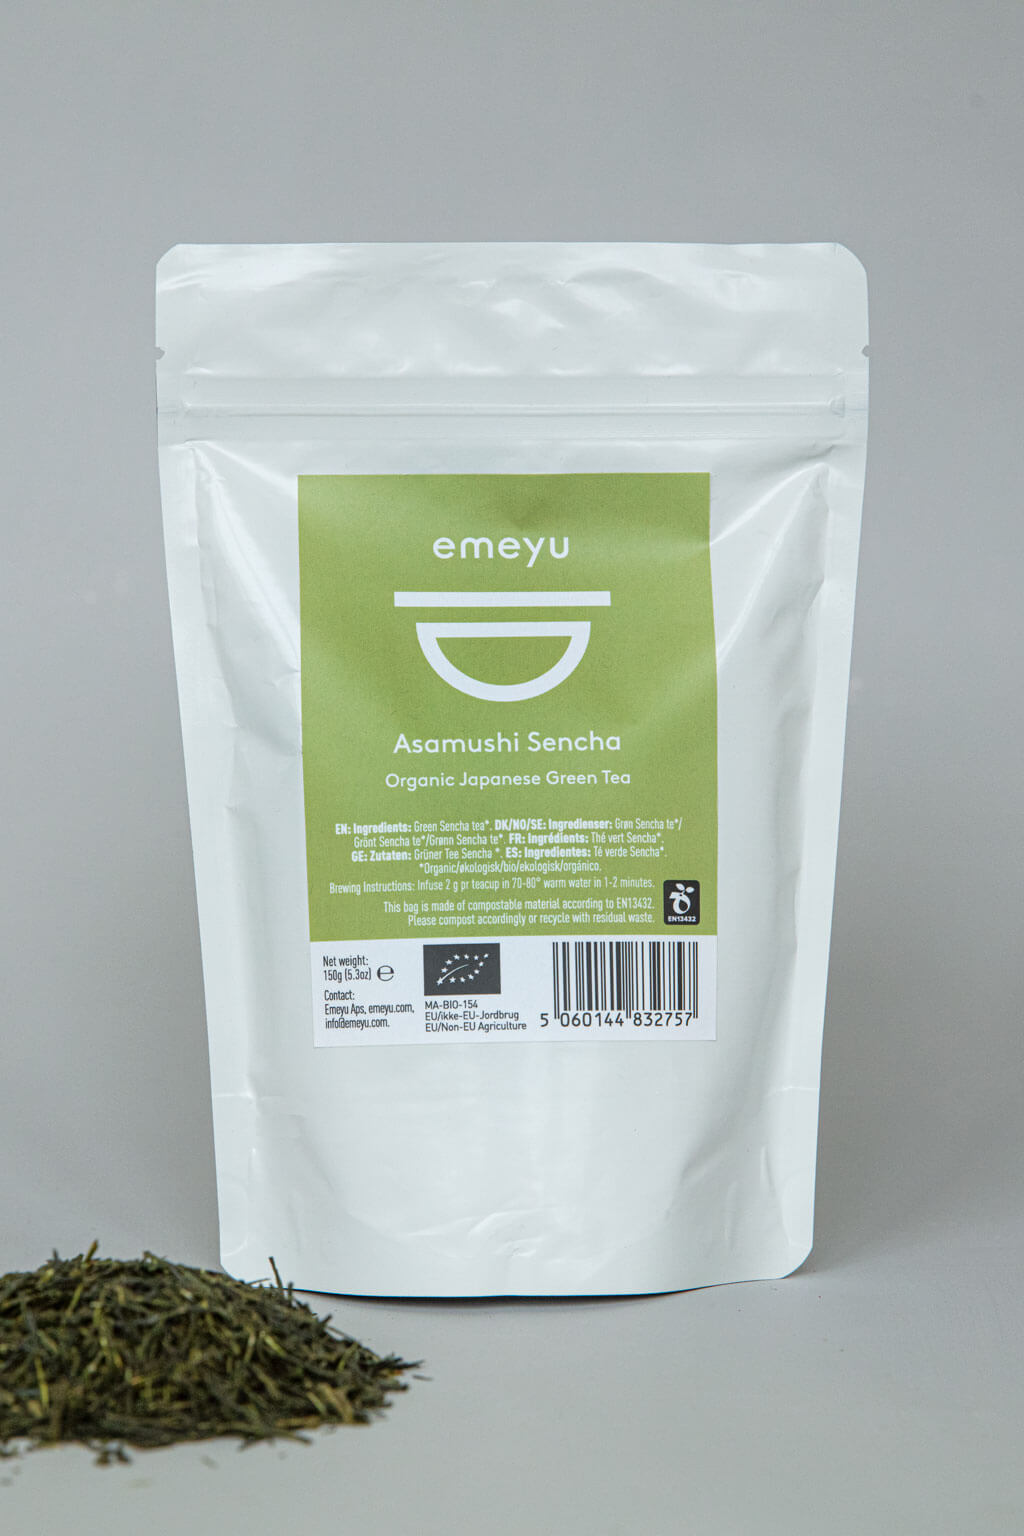 Emeyu’s Asamushi Sencha Japanease green tea is an organic whole leaf tea. An exclusive, second flush, slighty steamed green tea with a fresh, mild and grassy taste. The leaves are picked in early summer which also gives the beautiful light yellow colour of the whole leave tea. Rich in antioxidants. 150 g whole organic leaves in a resealable and sustainable doypack packaging.